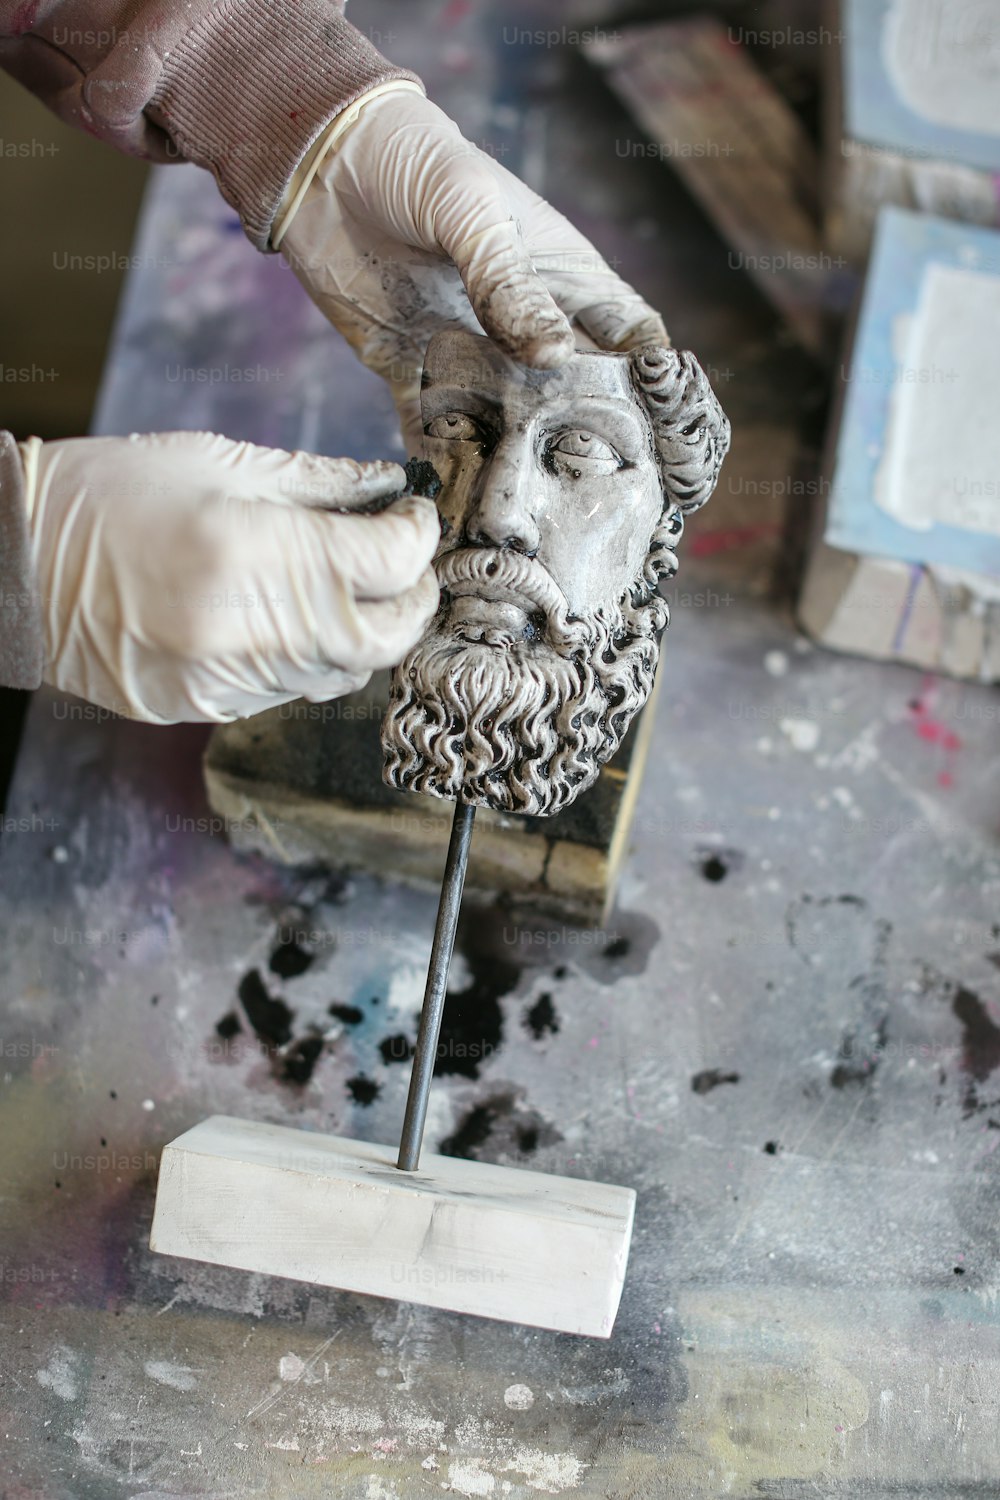 a statue of a man's head being worked on